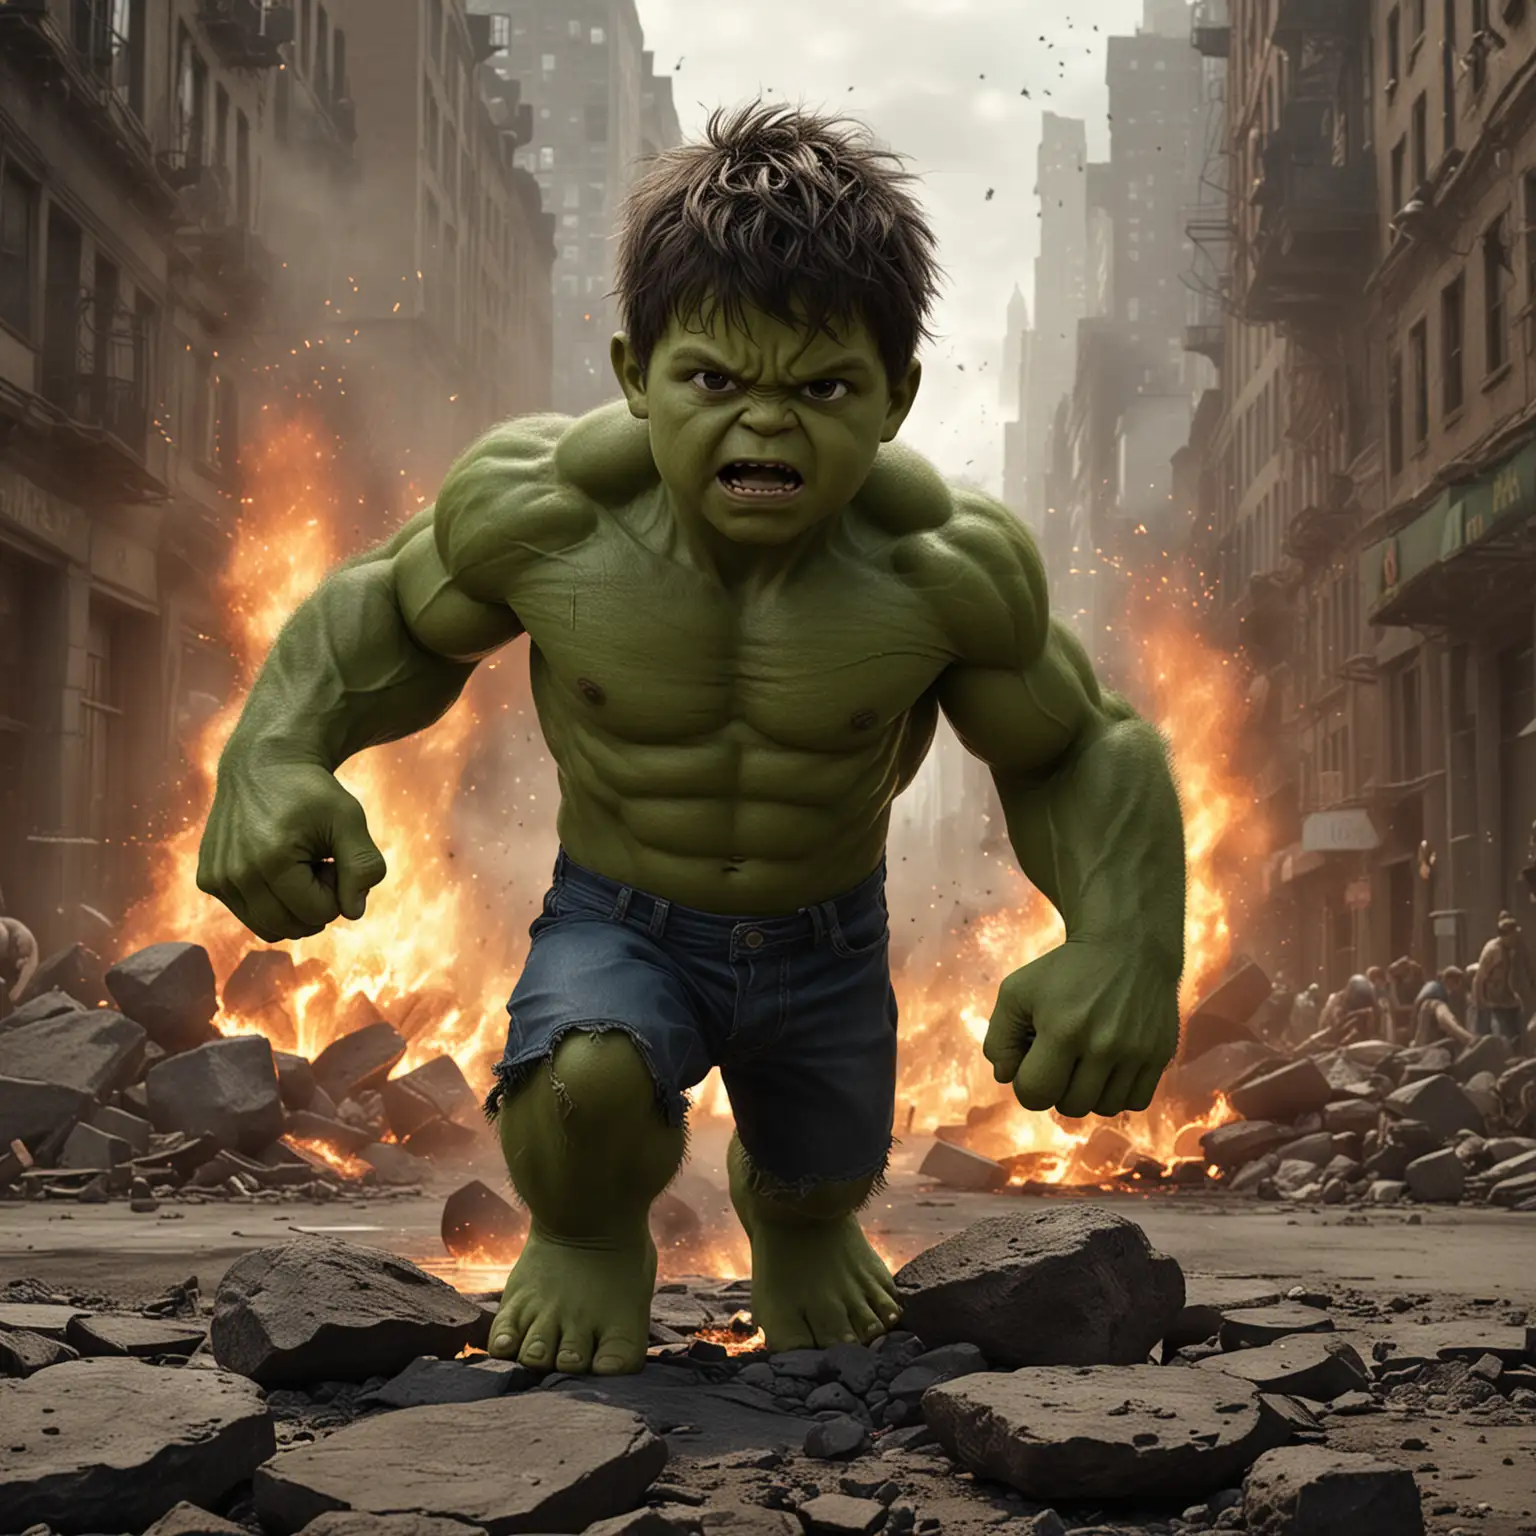 A 6-year-old boy transforms into the Hulk and lifts a rock in the middle of a  burning city. The image is hyper realistic and gives it a cinematic touch as if it were directed by Zack Snyder.